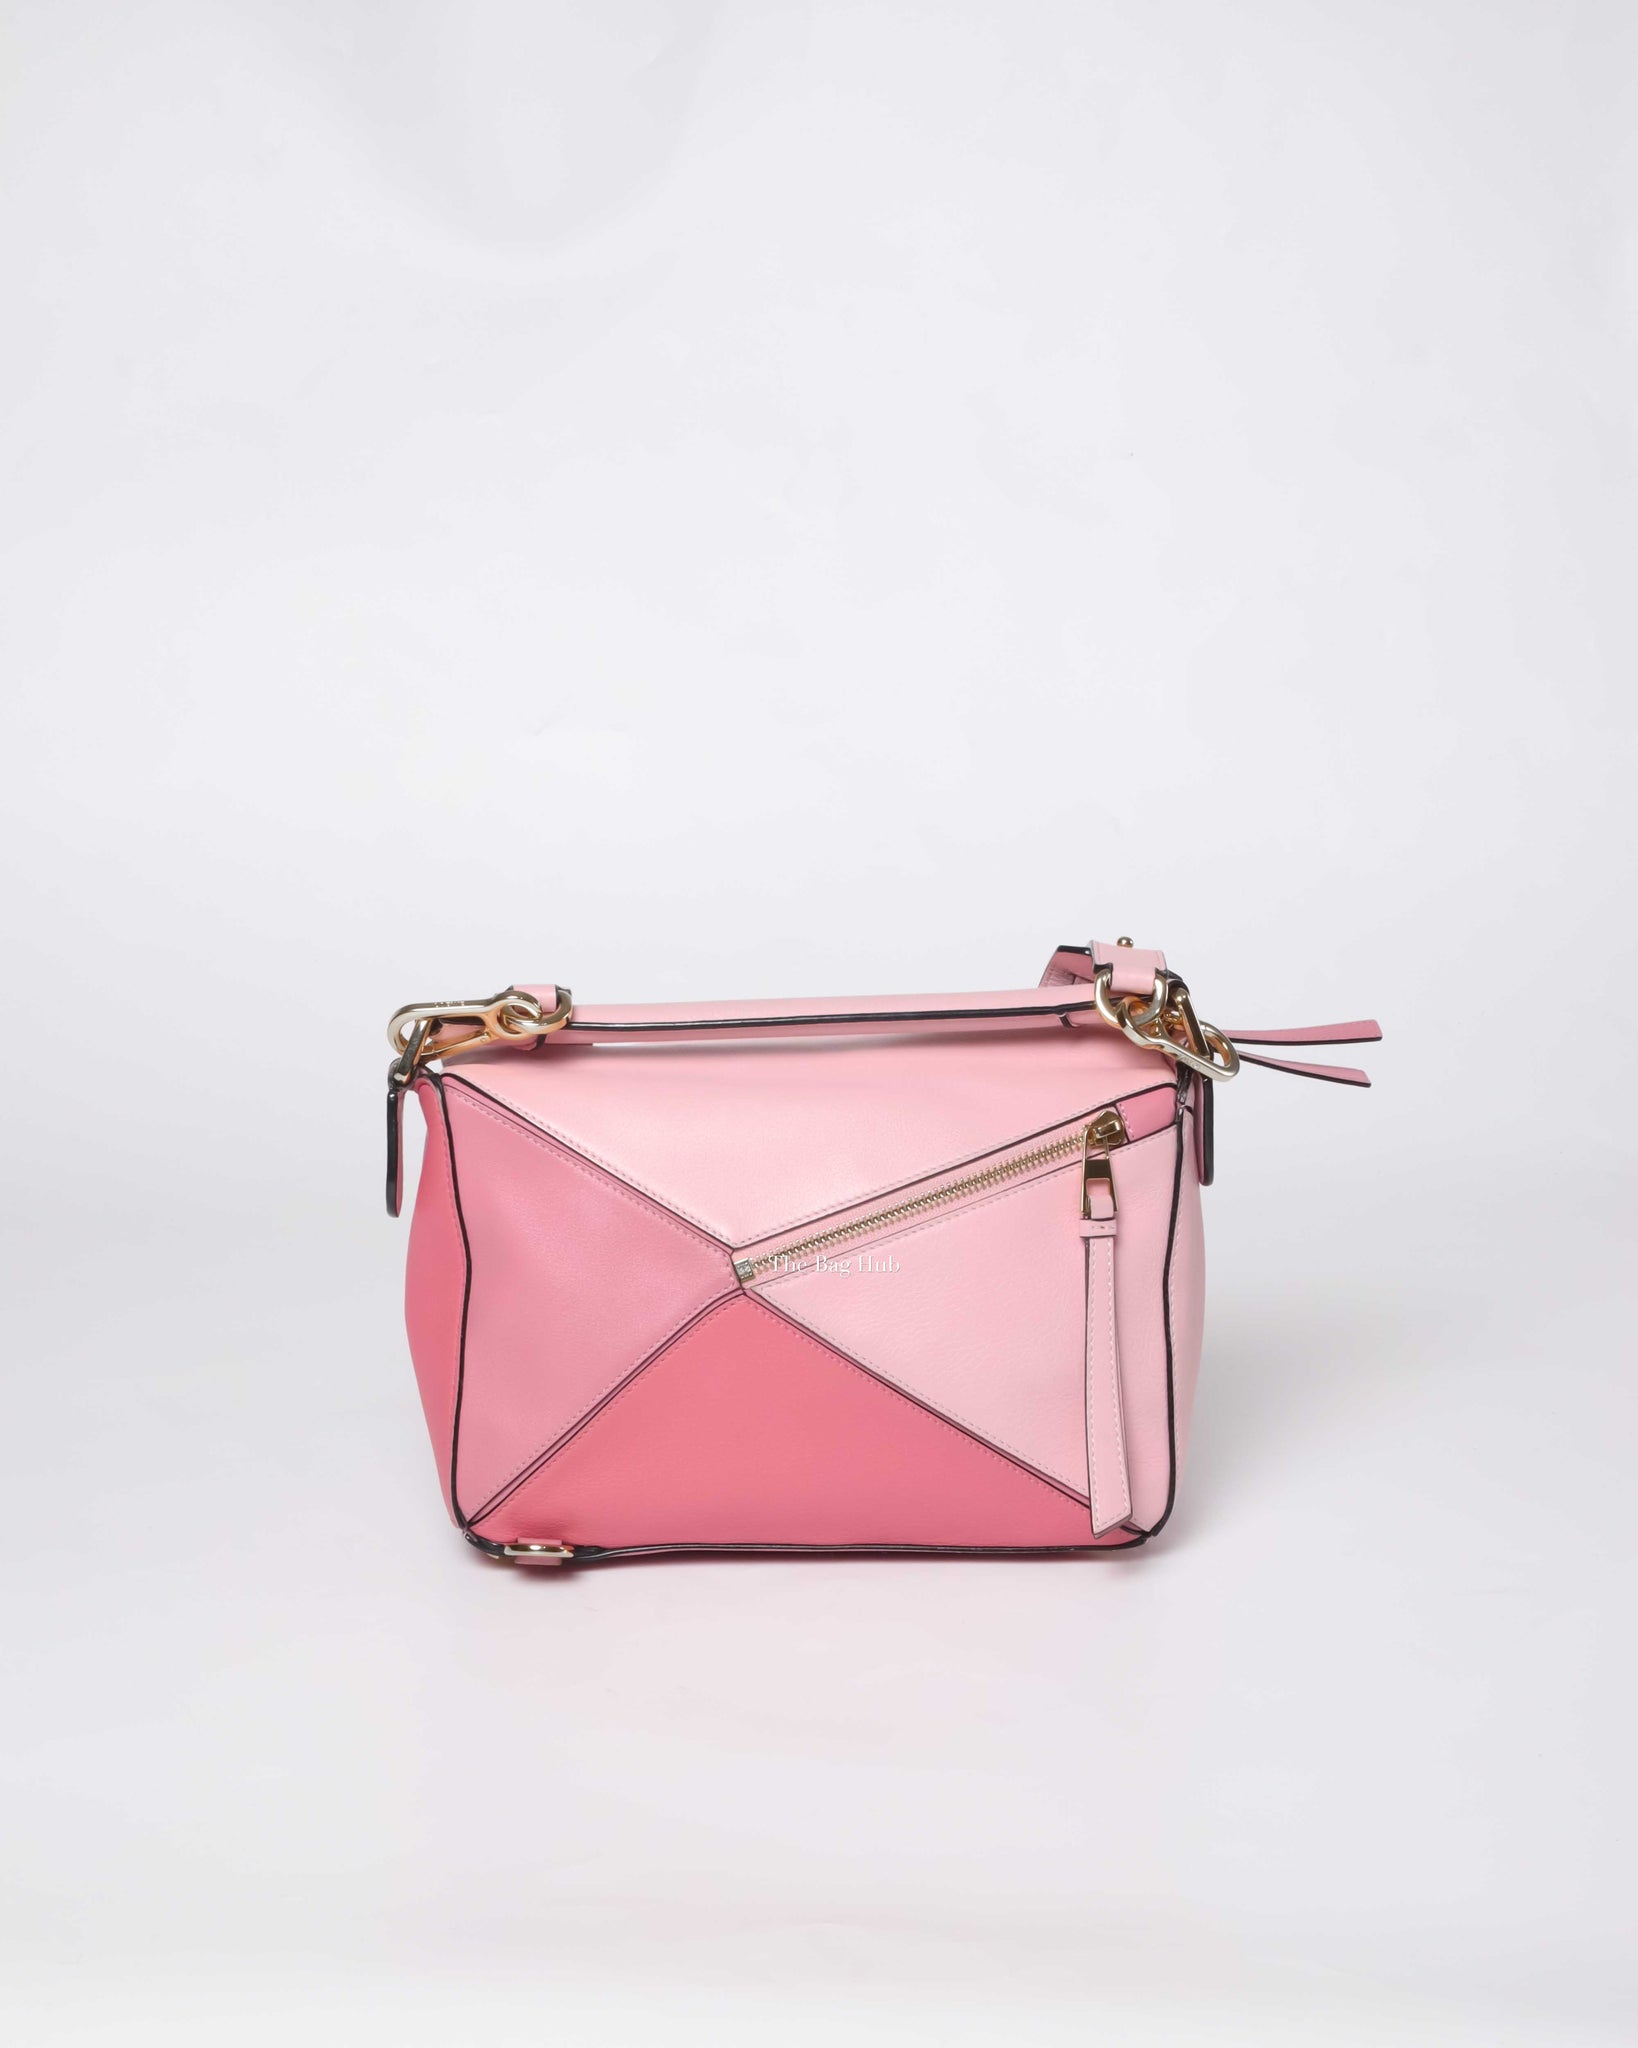 Loewe Pink Tricolor Leather Small Puzzle Bag, Designer Brand, Authentic  Loewe